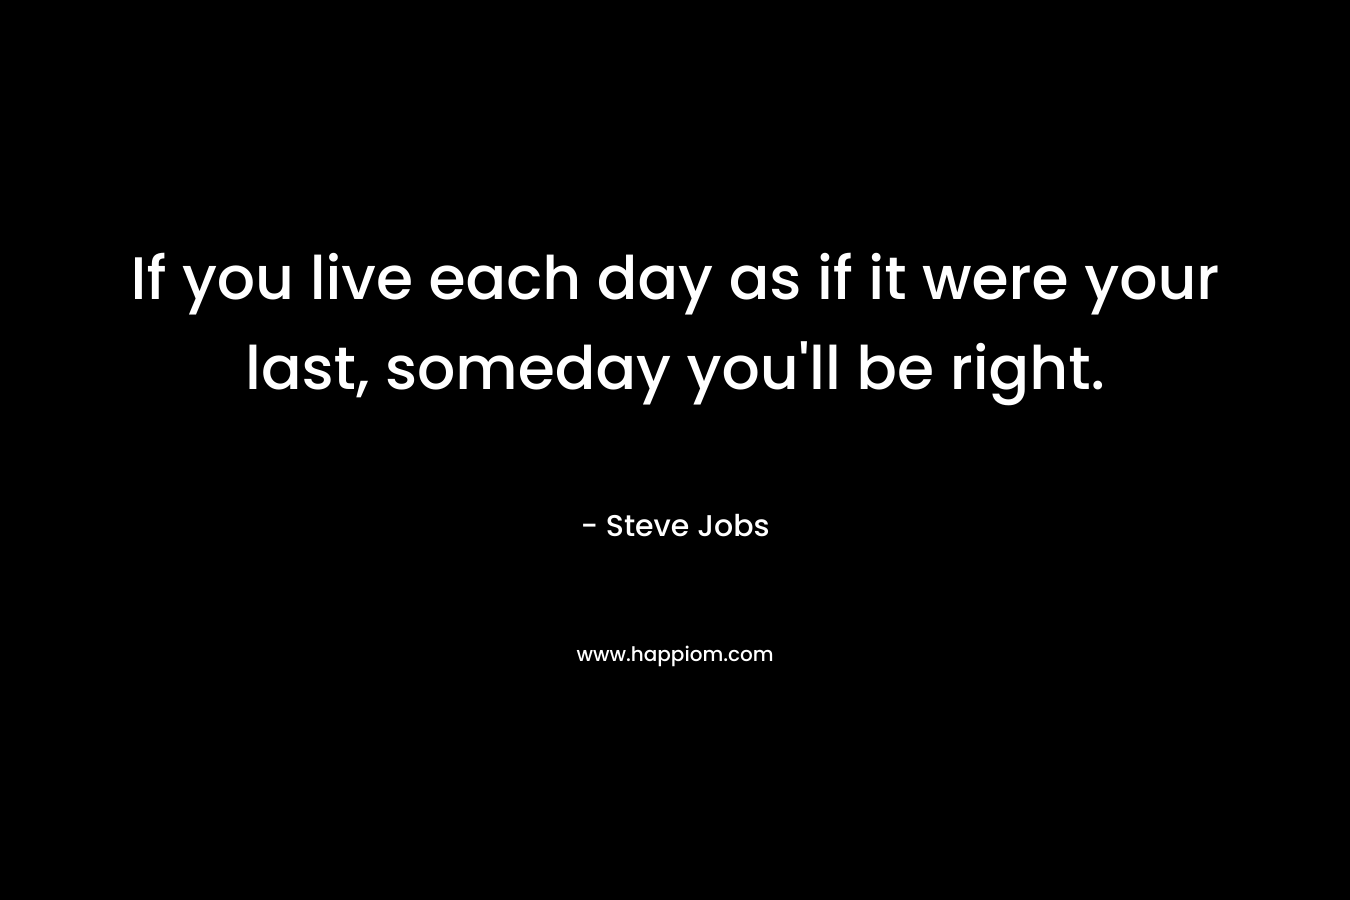 If you live each day as if it were your last, someday you’ll be right. – Steve Jobs